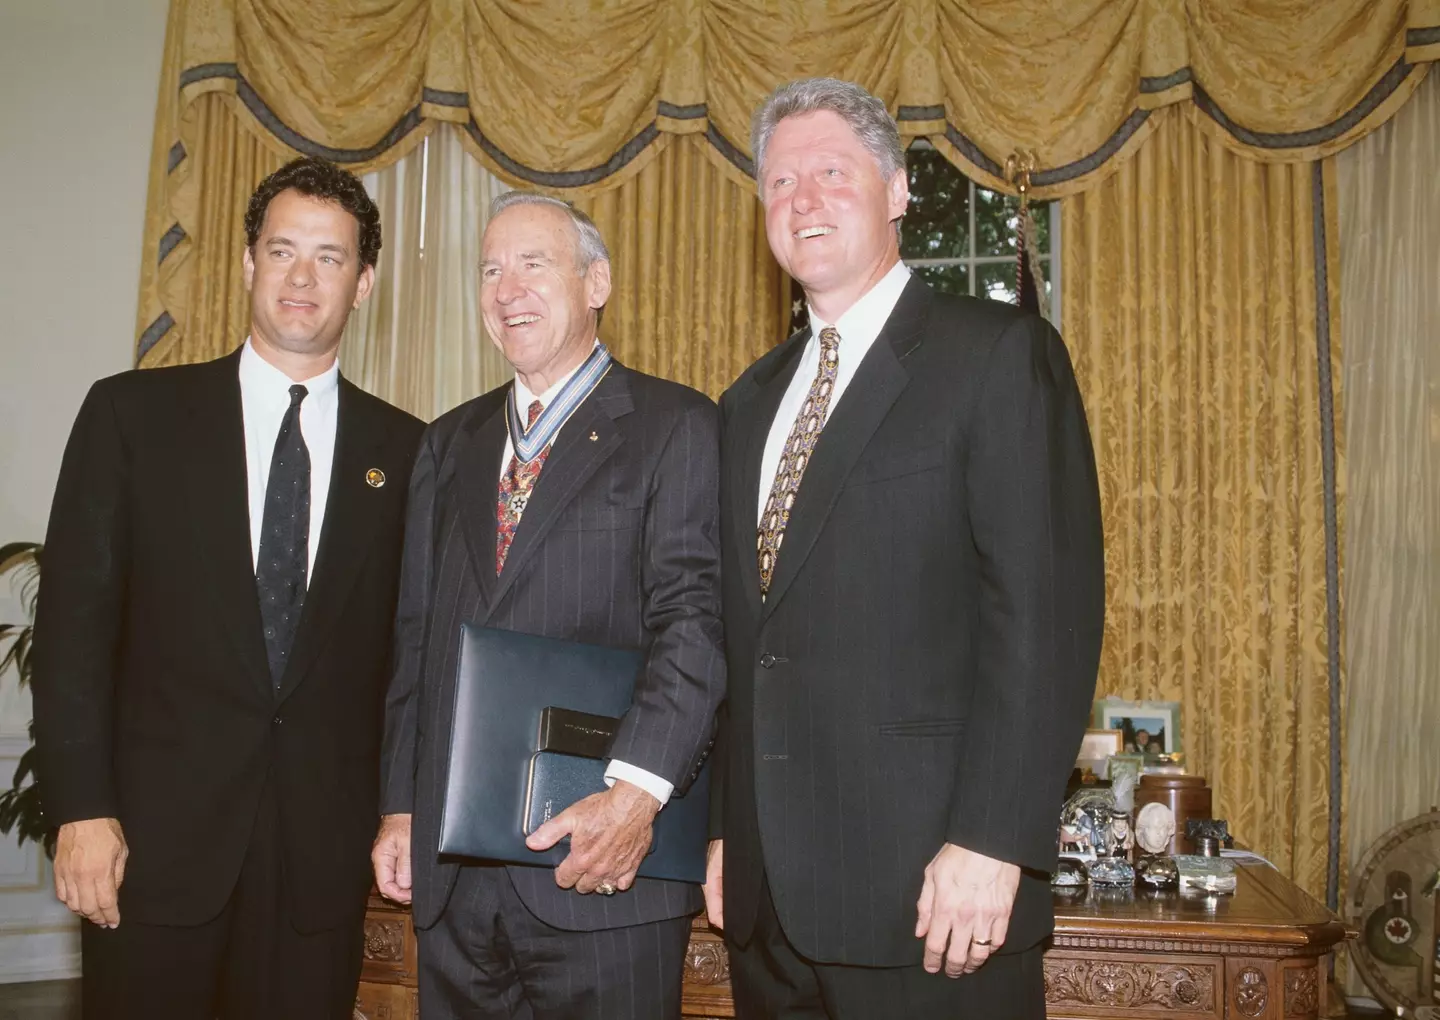 Hanks with Apollo 13 astronaut Jim Lovell and former president Bill Clinton.